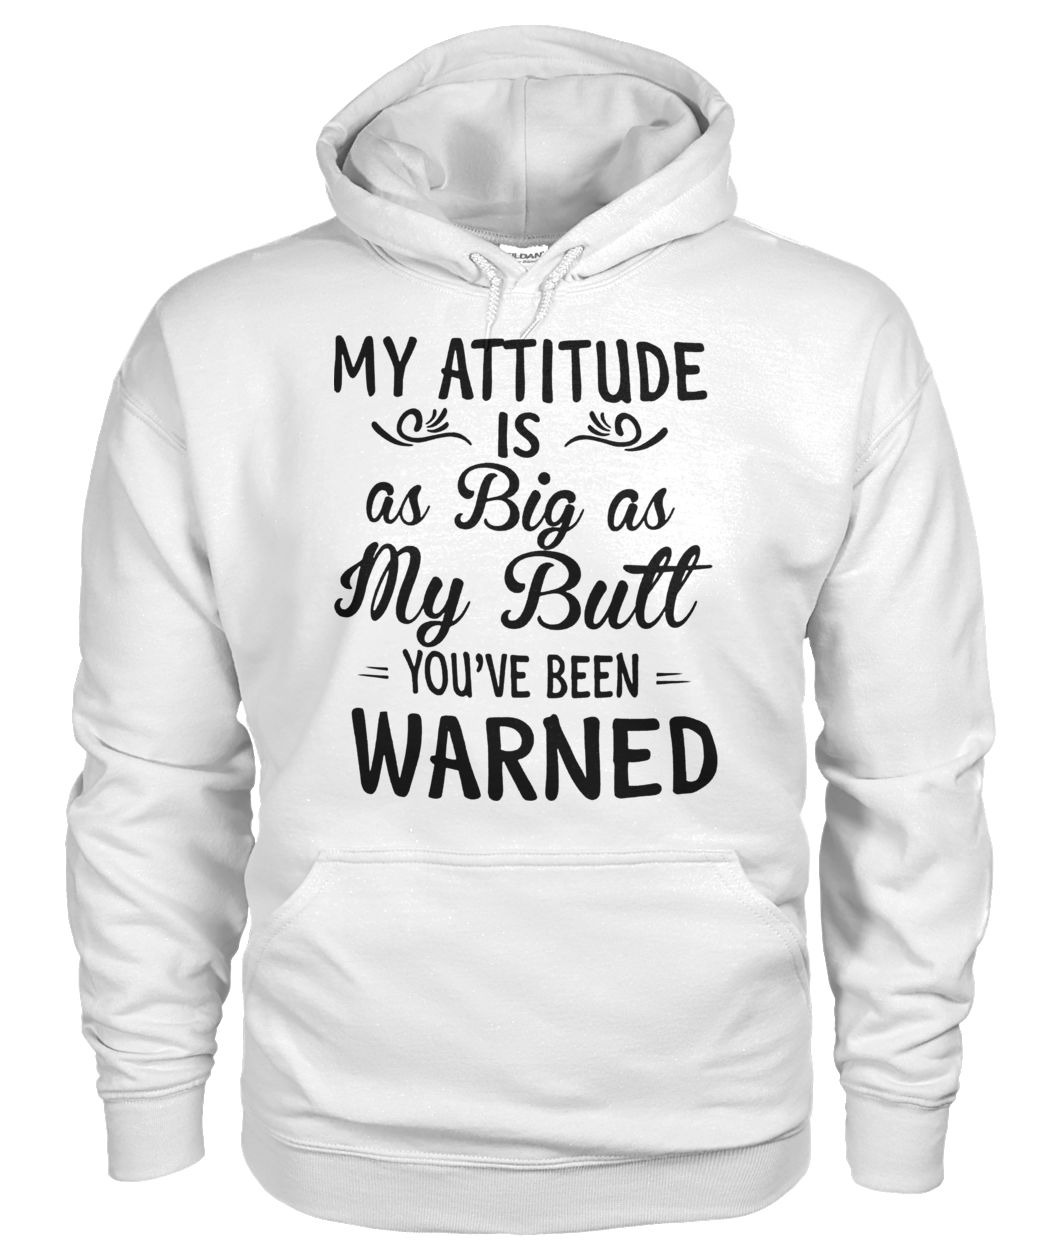 My attitude is as big as my butt you've been warned hoodie